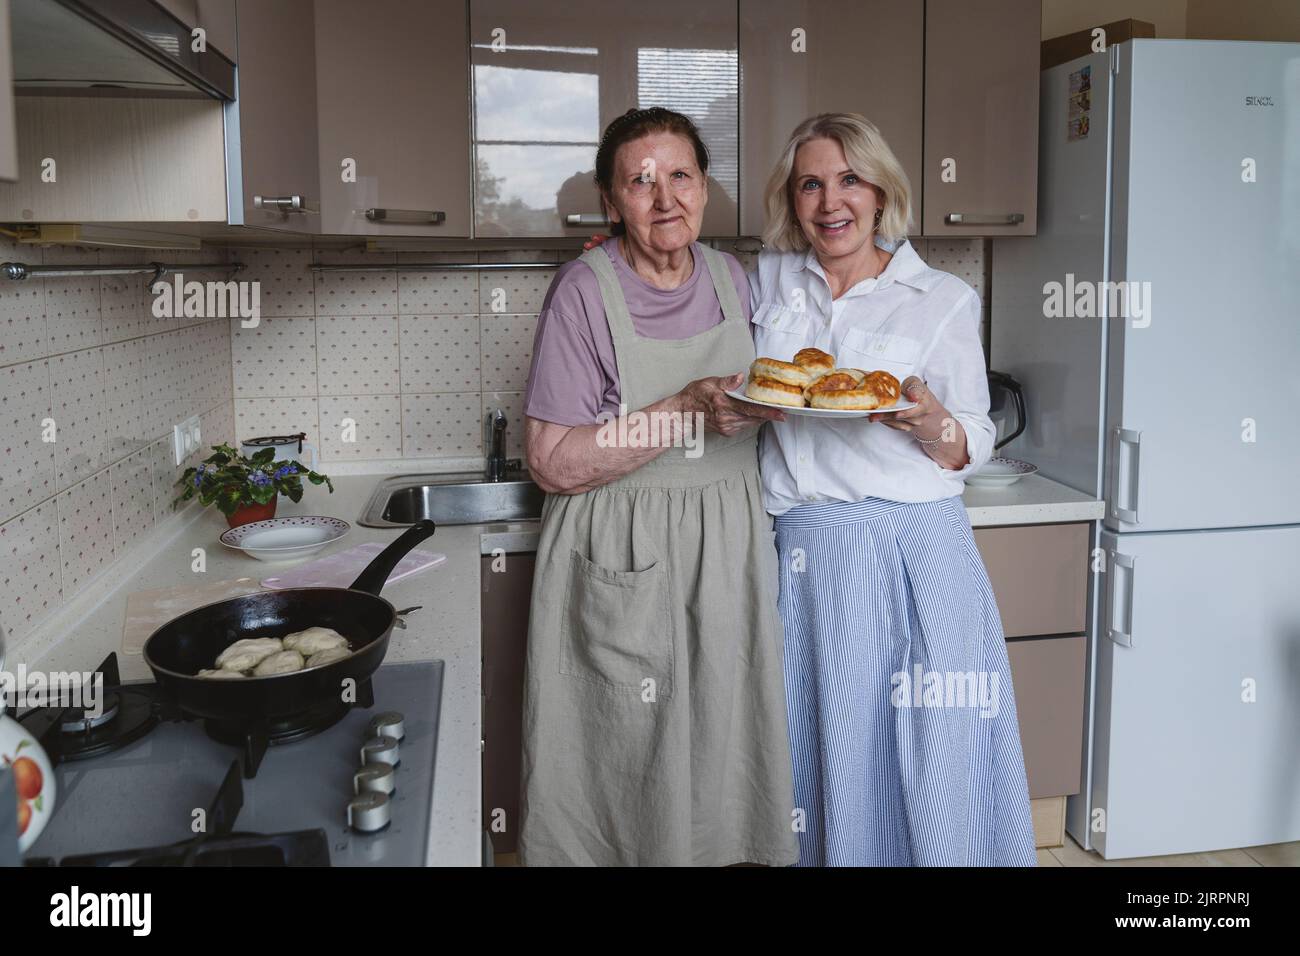 An aged mother and daughter are cooking pies in the kitchen. Stock Photo